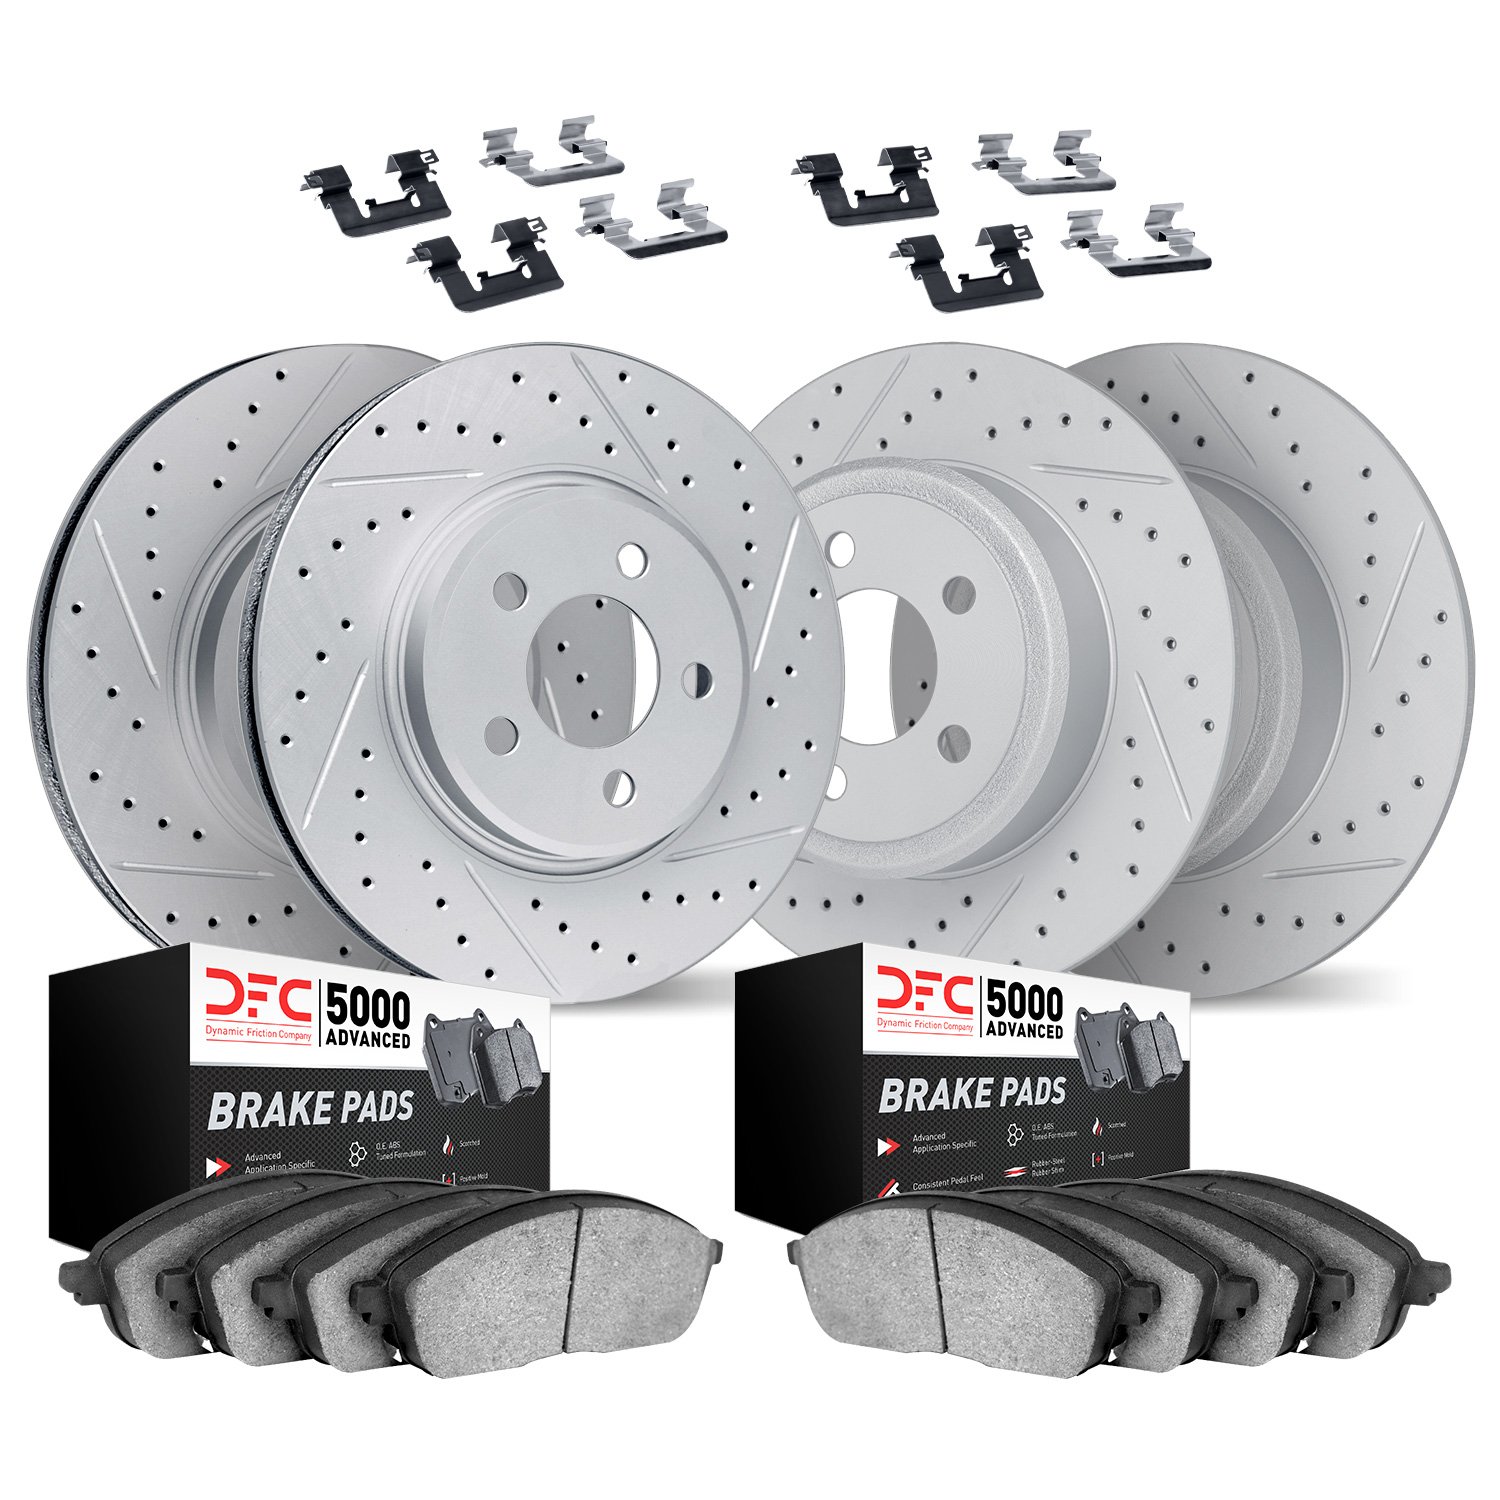 2514-59075 Geoperformance Drilled/Slotted Rotors w/5000 Advanced Brake Pads Kit & Hardware, Fits Select Acura/Honda, Position: F